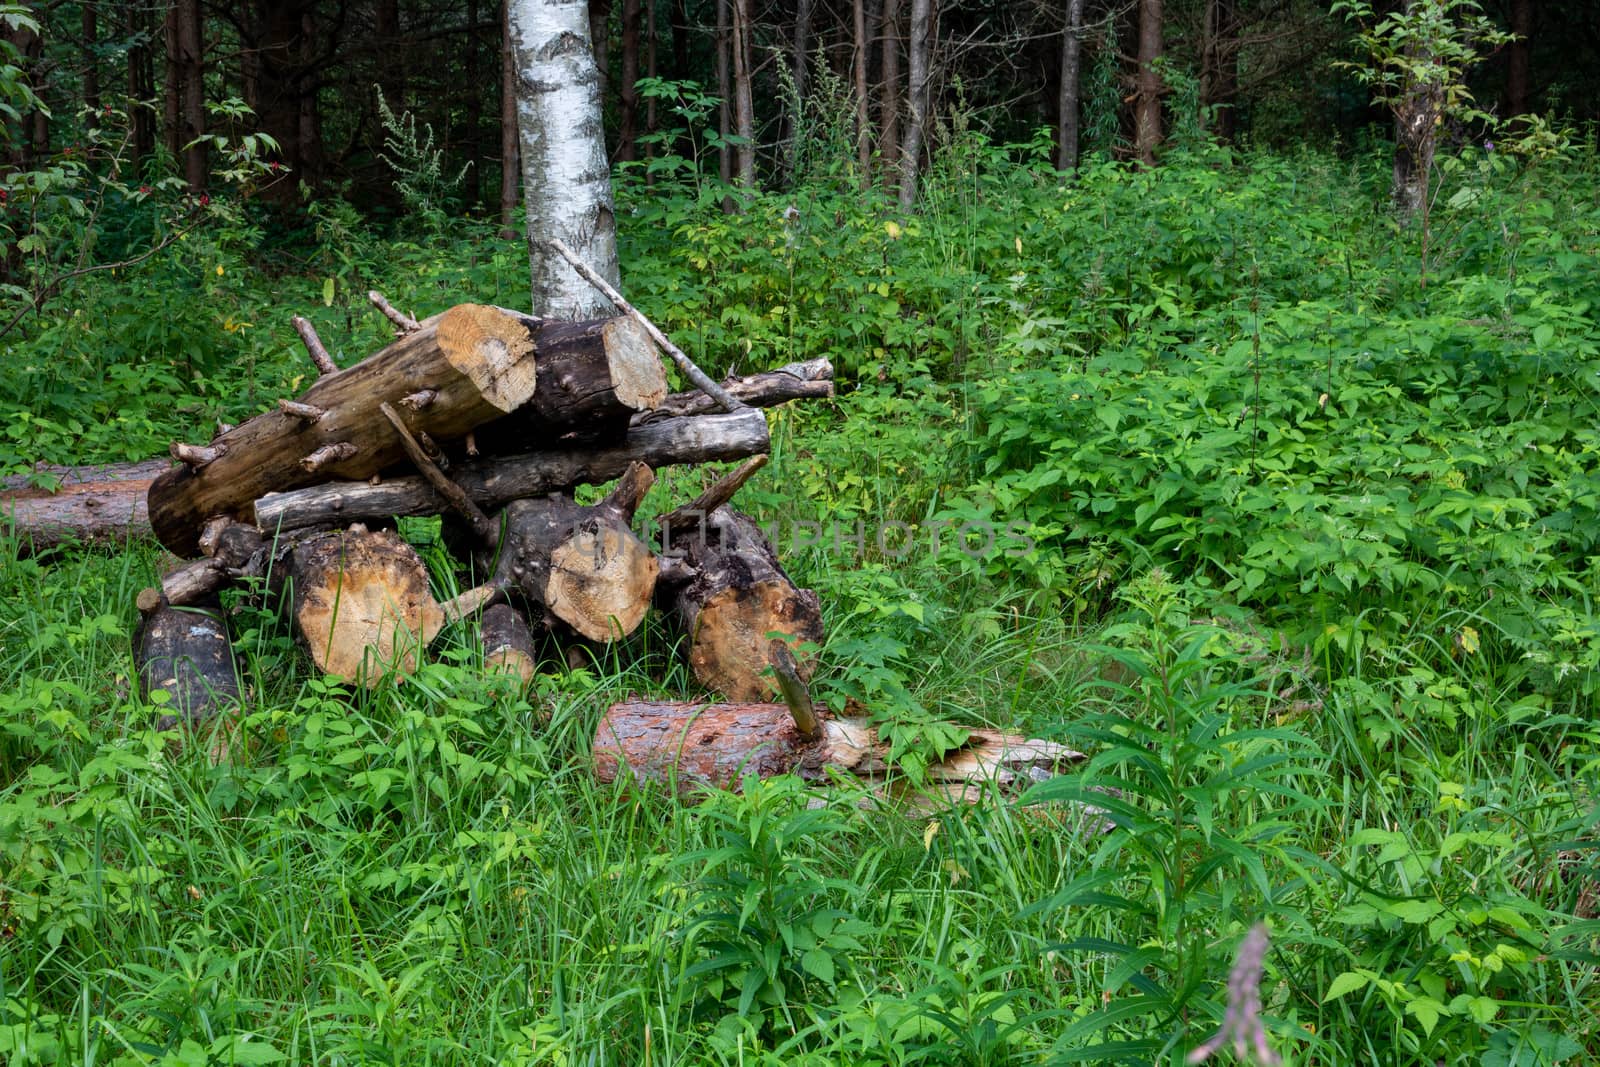 Sawn tree trunk. The wood was cut into stumps in the forest. Firewood from the sawed pine trees lie on the ground.